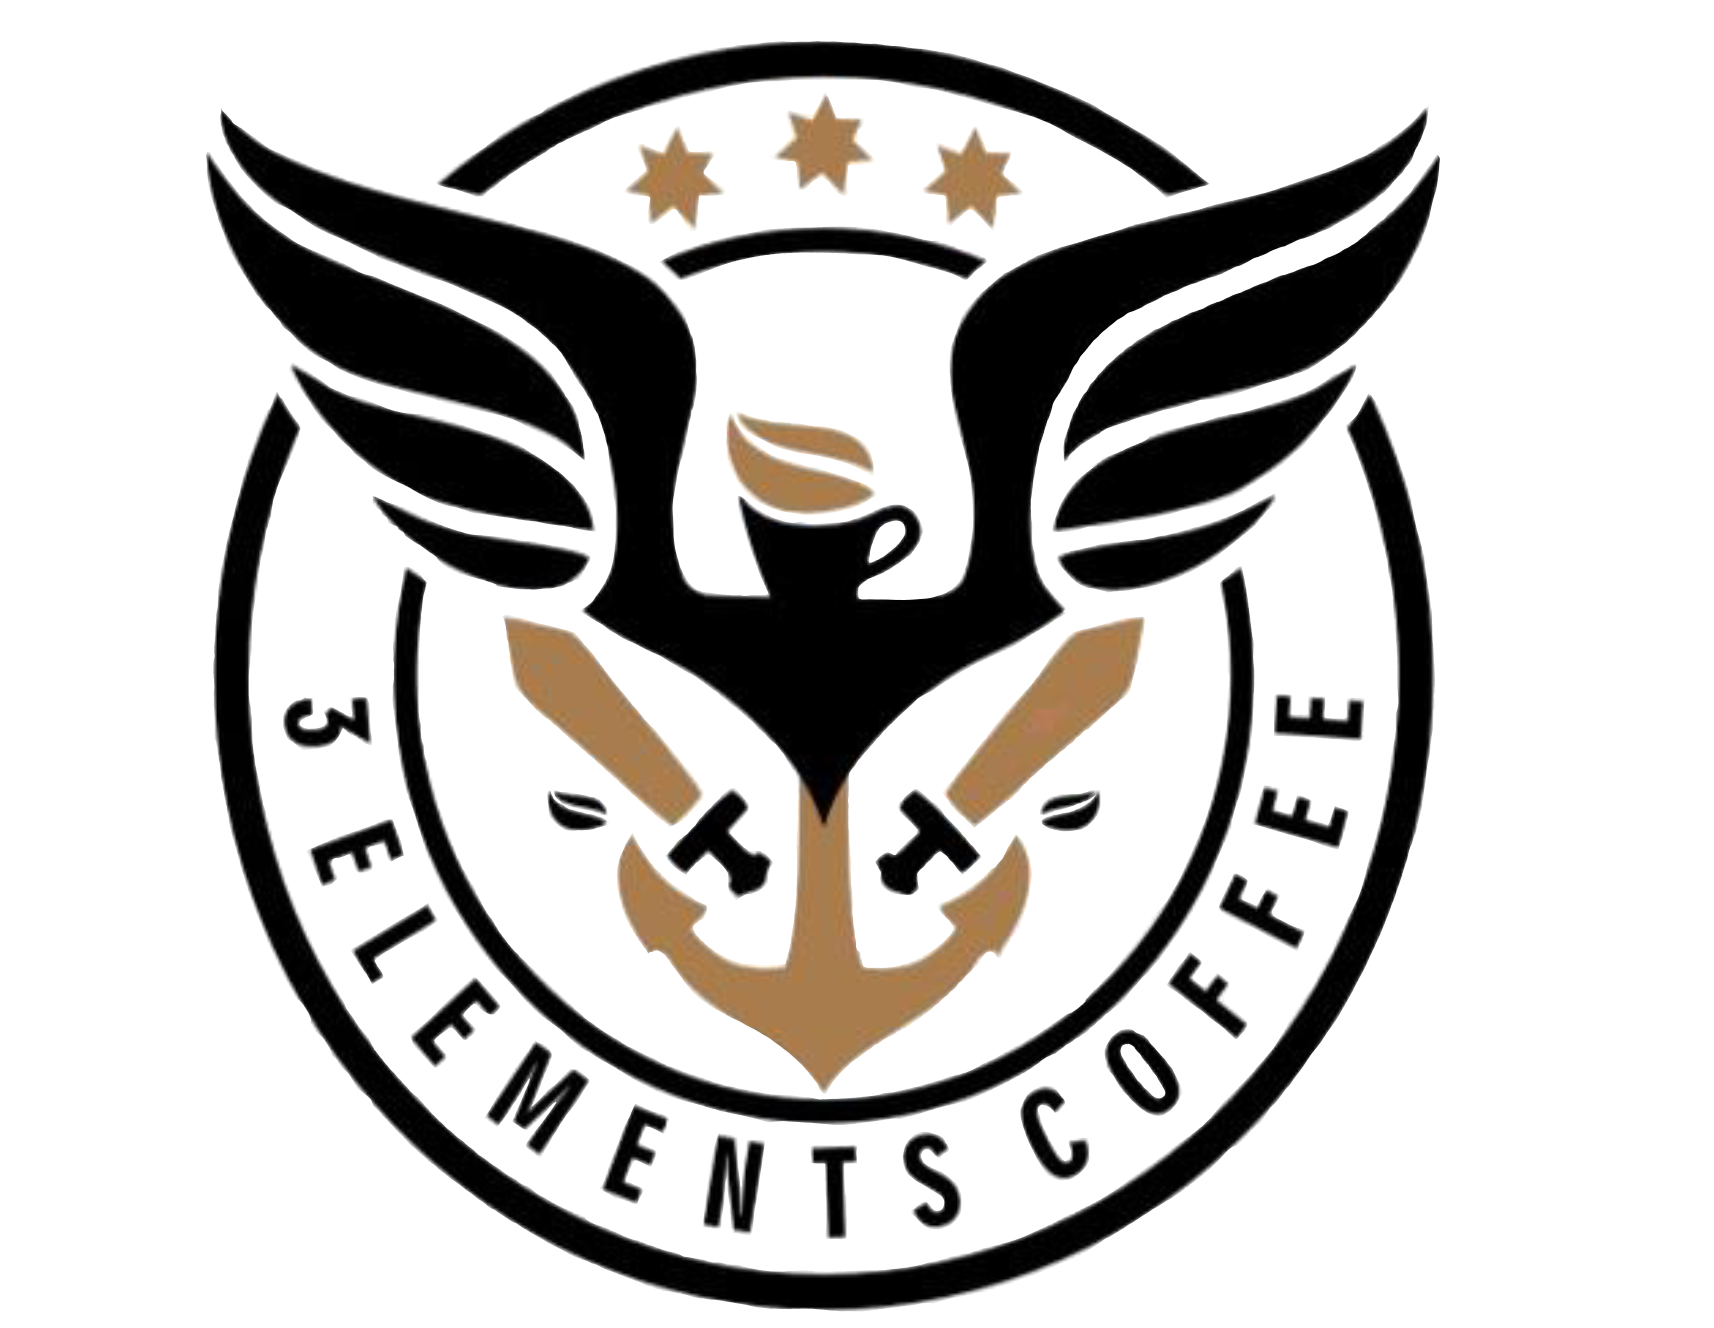 3 Elements Coffee - A Veteran-Owned Company